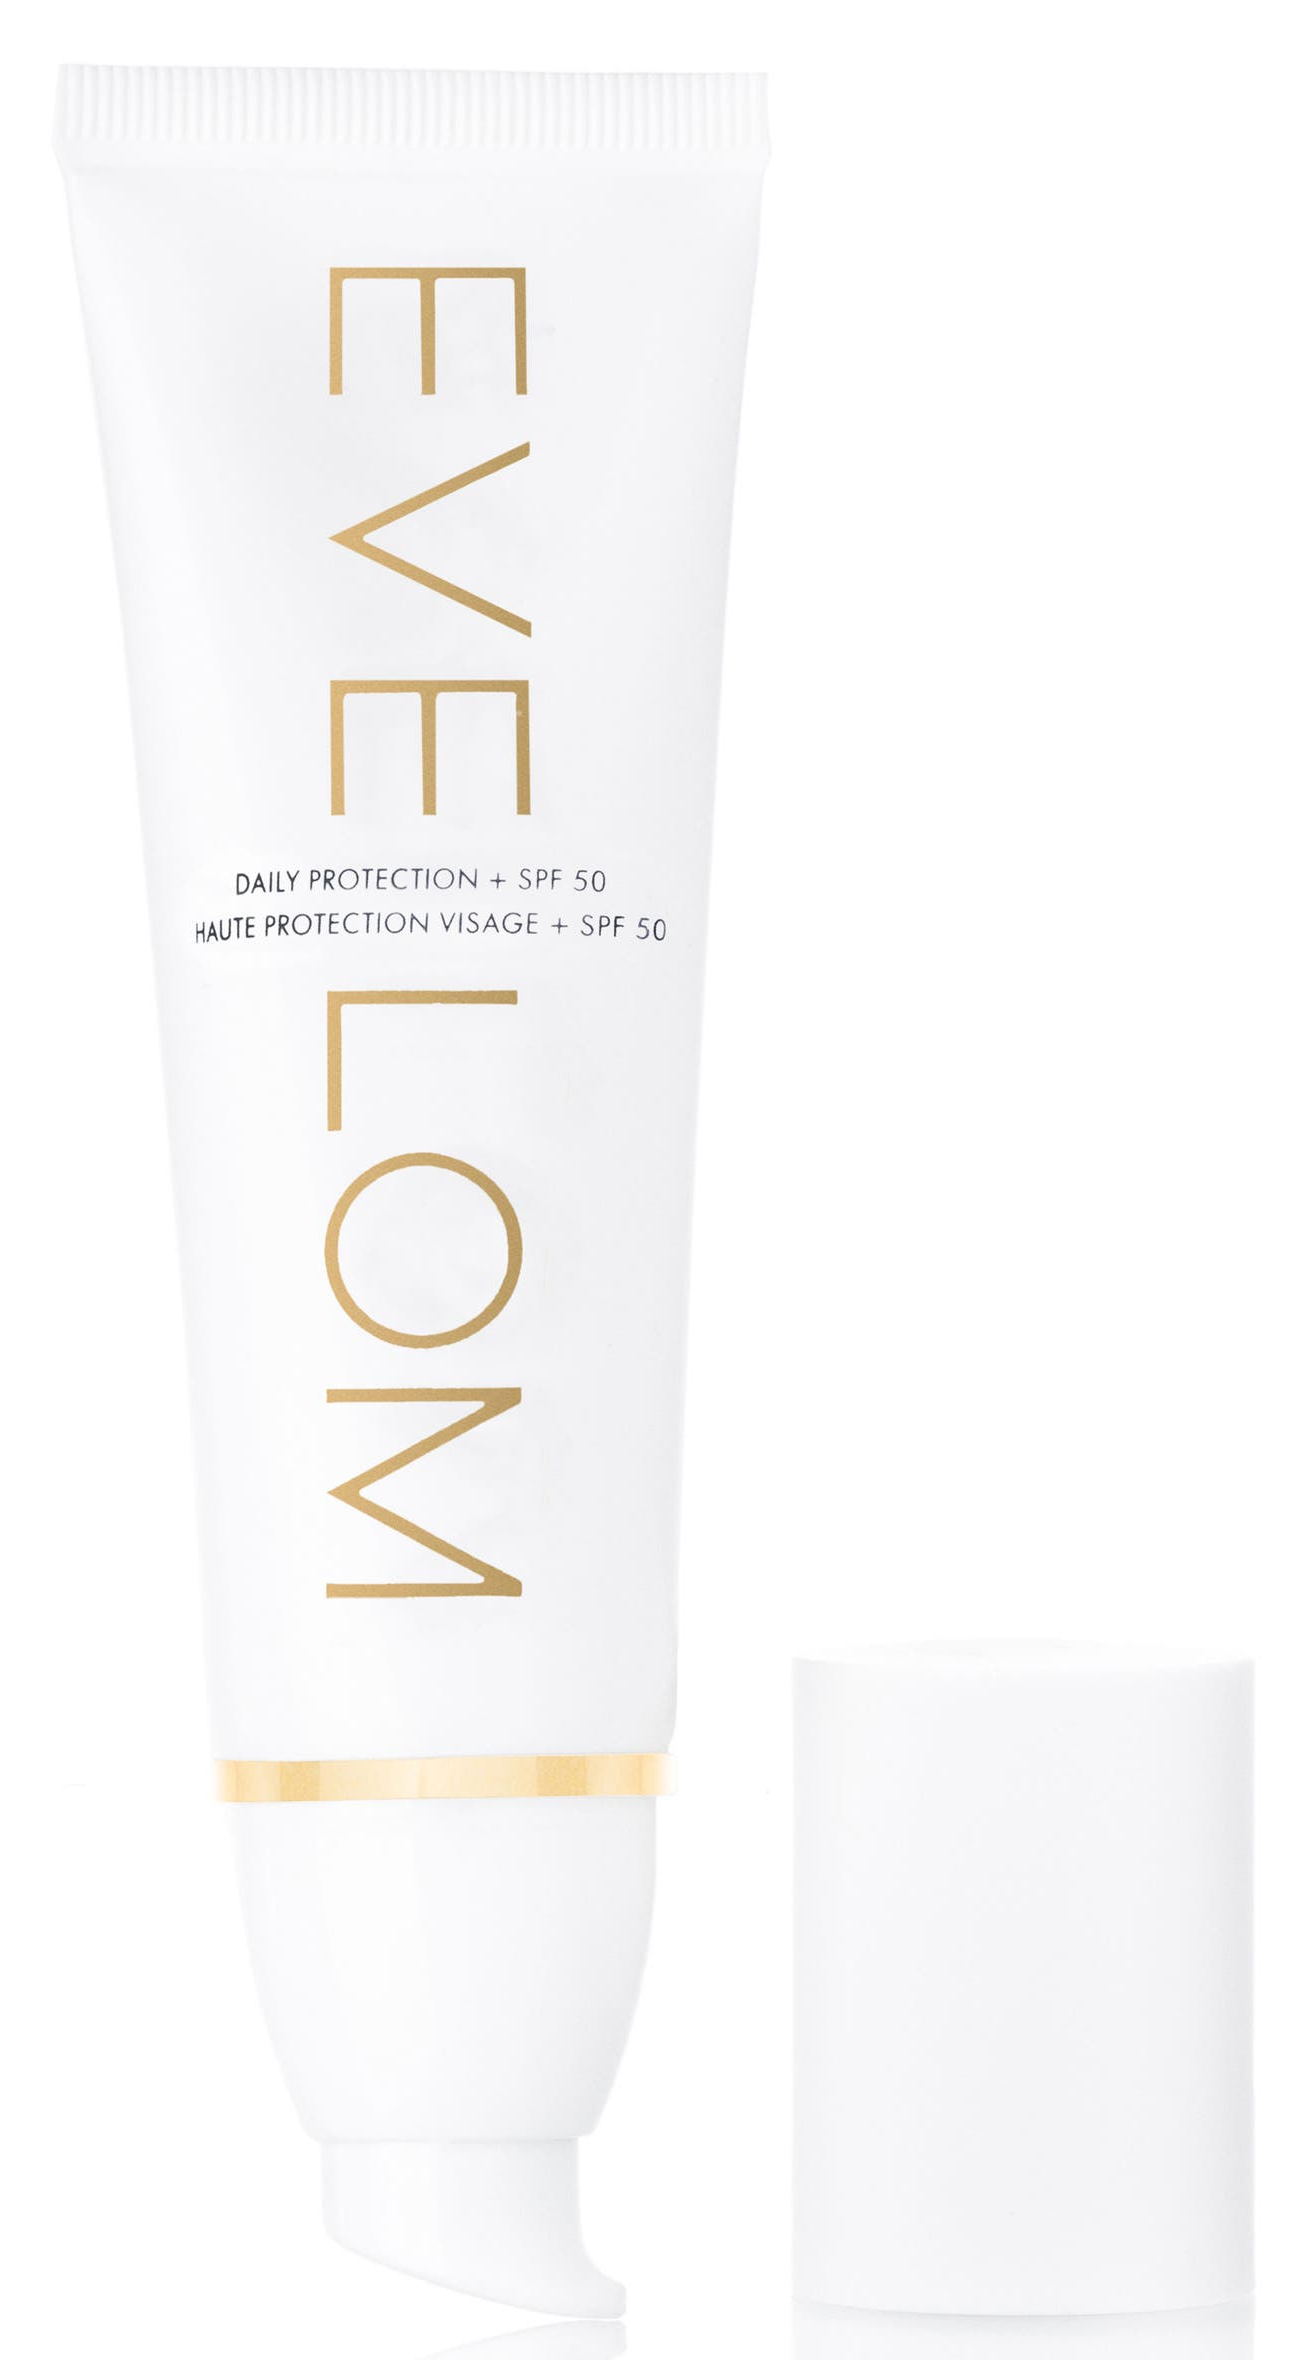 EVE LOM DAILY PROTECTION SUNSCREEN SPF 50 1.7 OZ / 50 ML - NEW